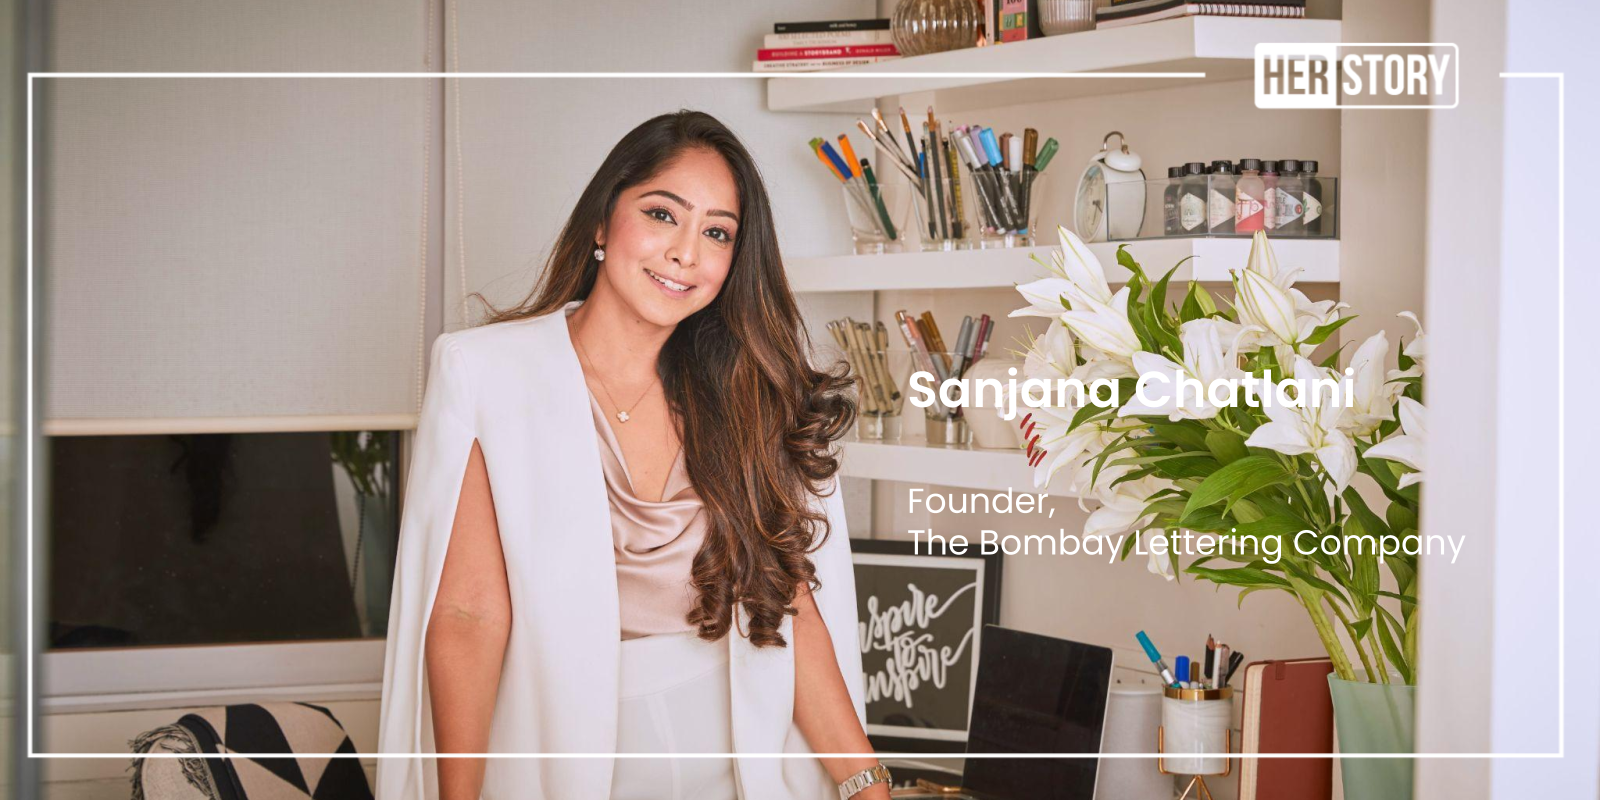 How this calligrapher nurtured her passion to start a business with clients like Google, Jimmy Choo, Michael Kors, Gucci, and others